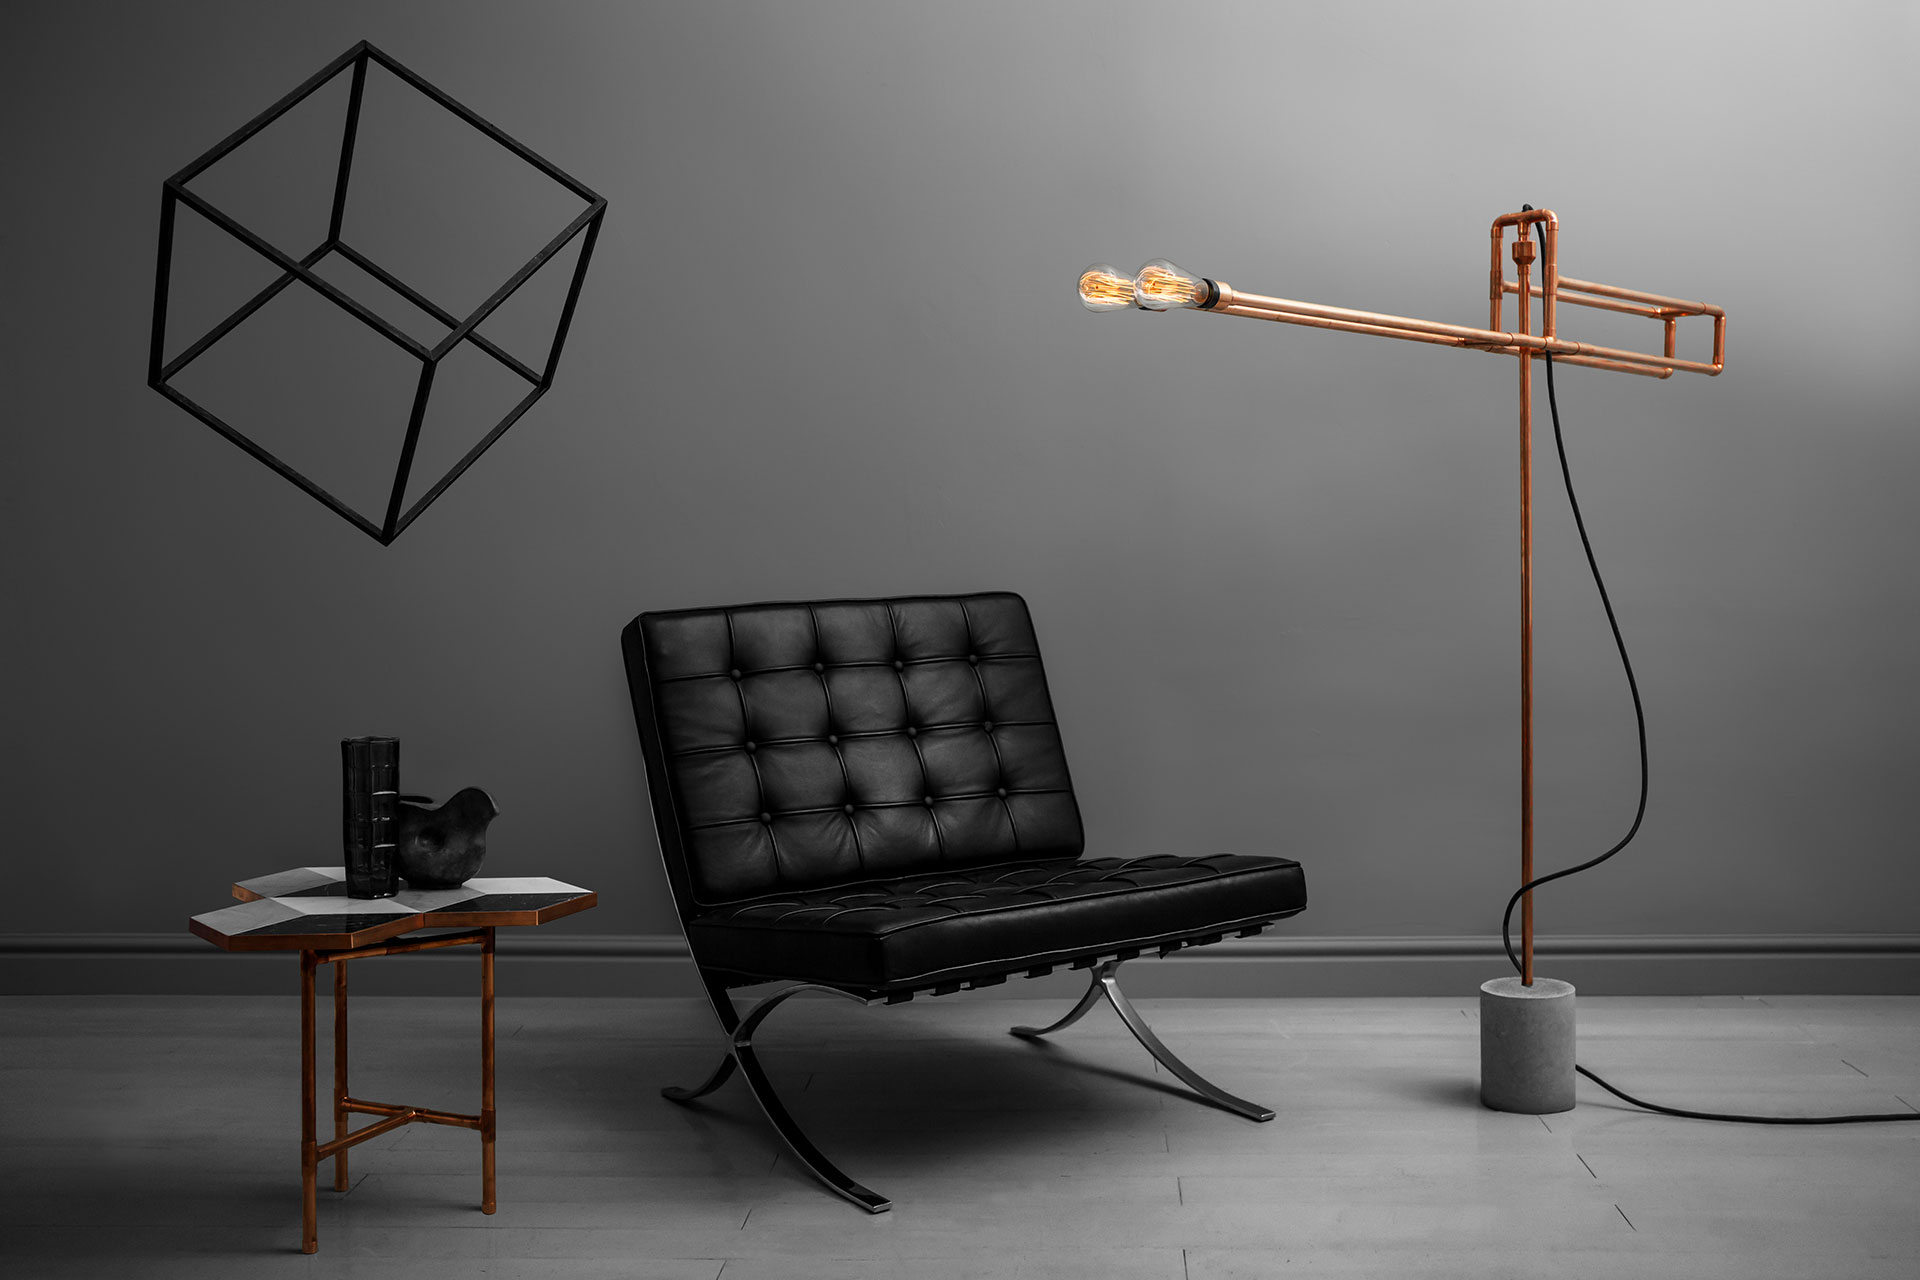 Industrial design floor lamp made of copper and concrete in loft style men's apartment